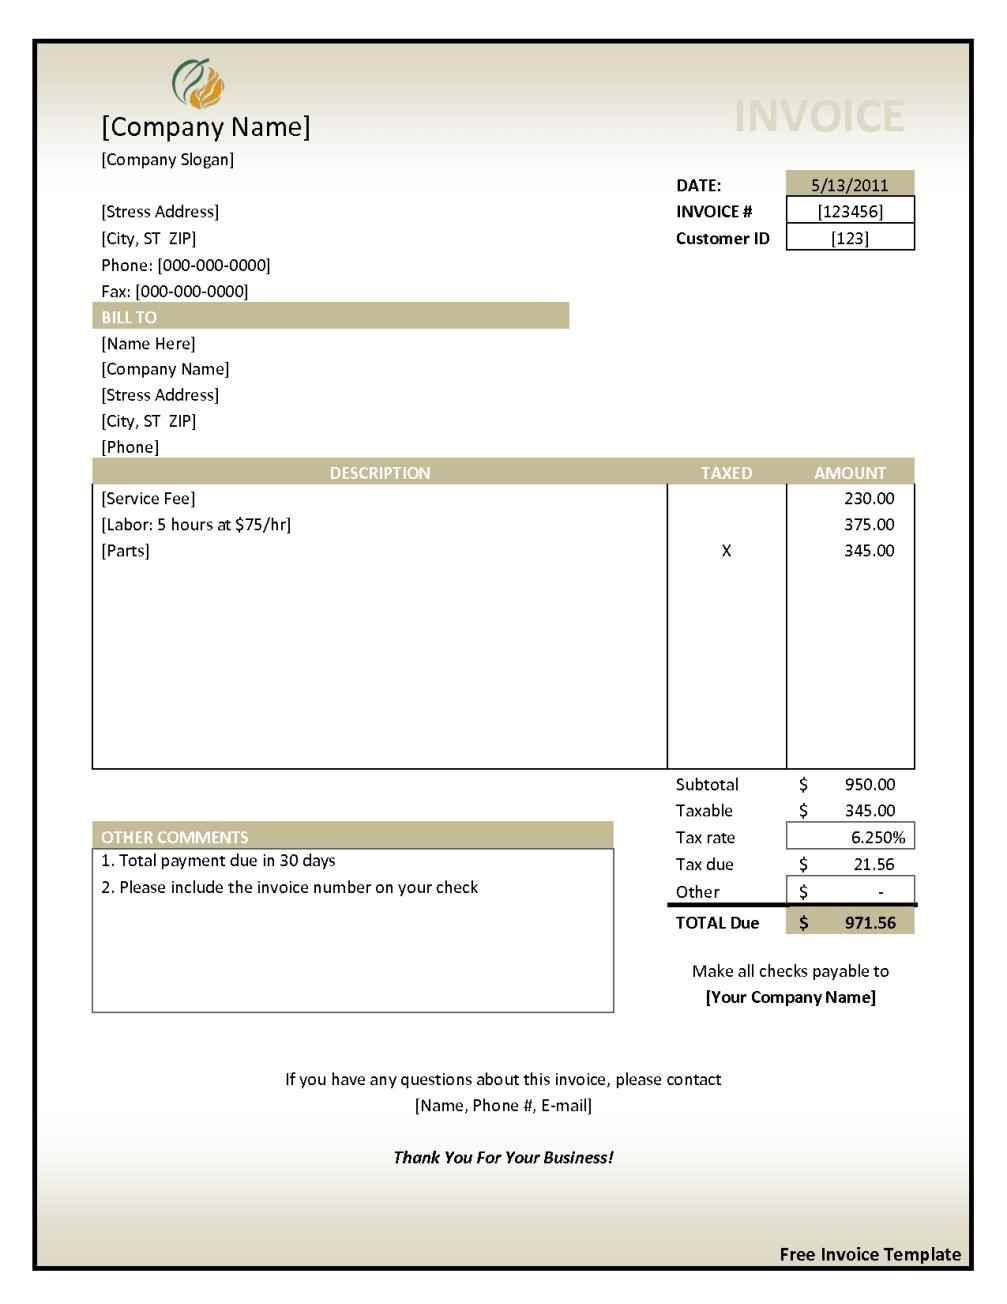 job form sample part 12 free medical invoice template